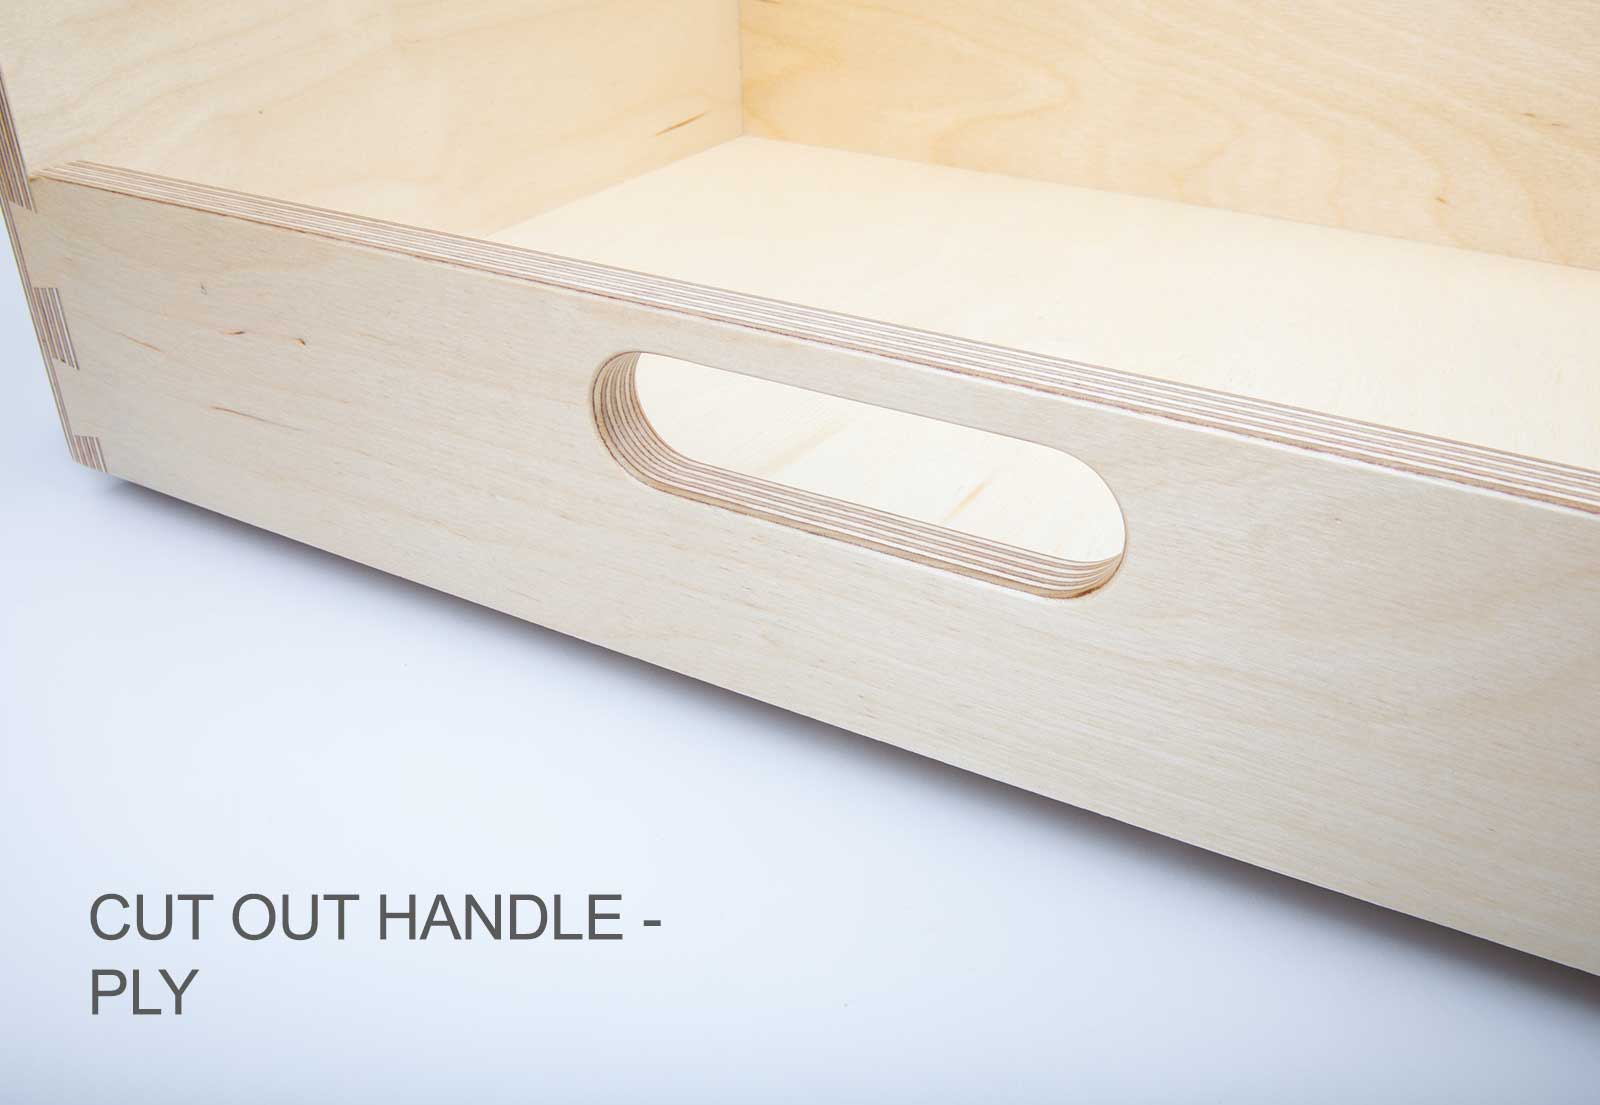 Ply cut out handle